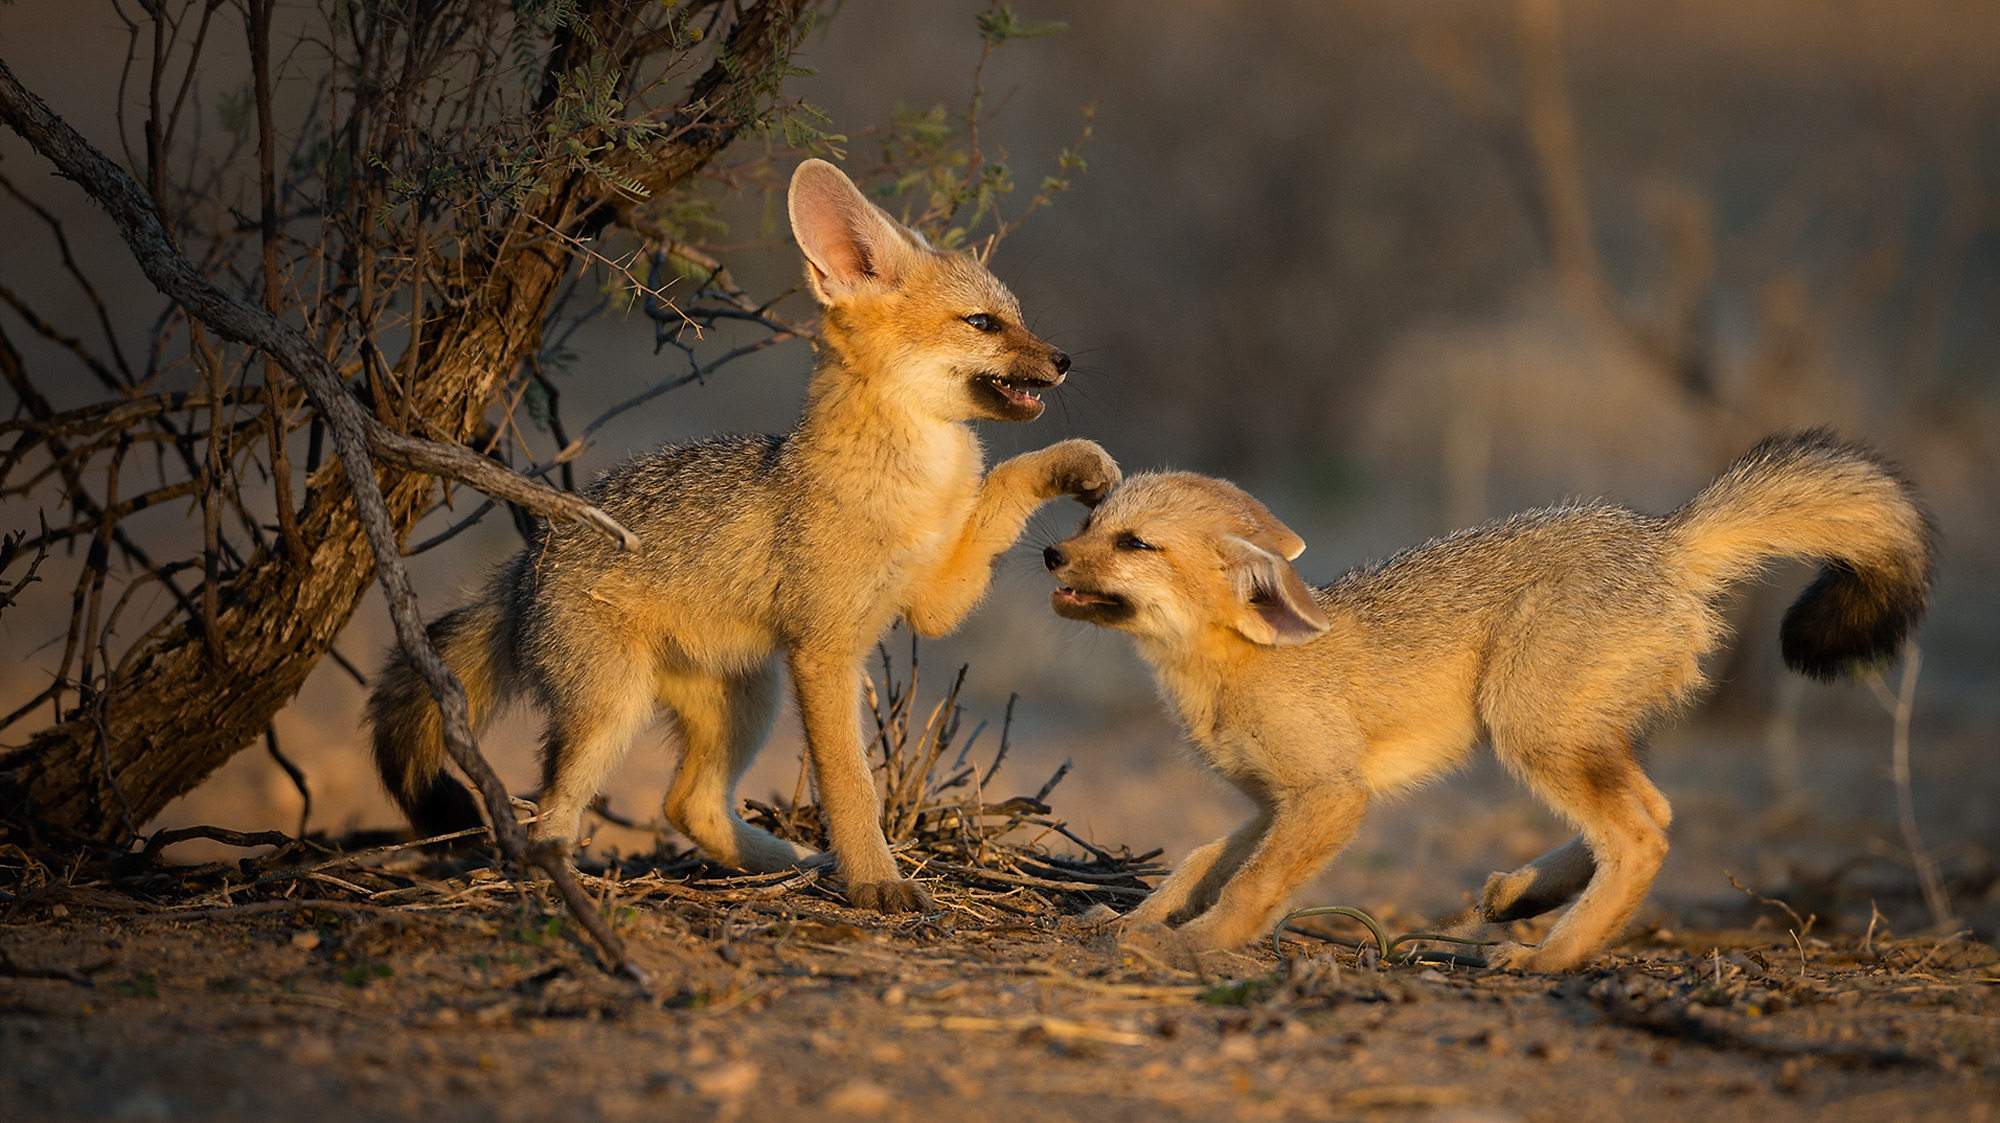 Two young Cape foxes play in Kgalagadi Transfrontier Park, South Africa